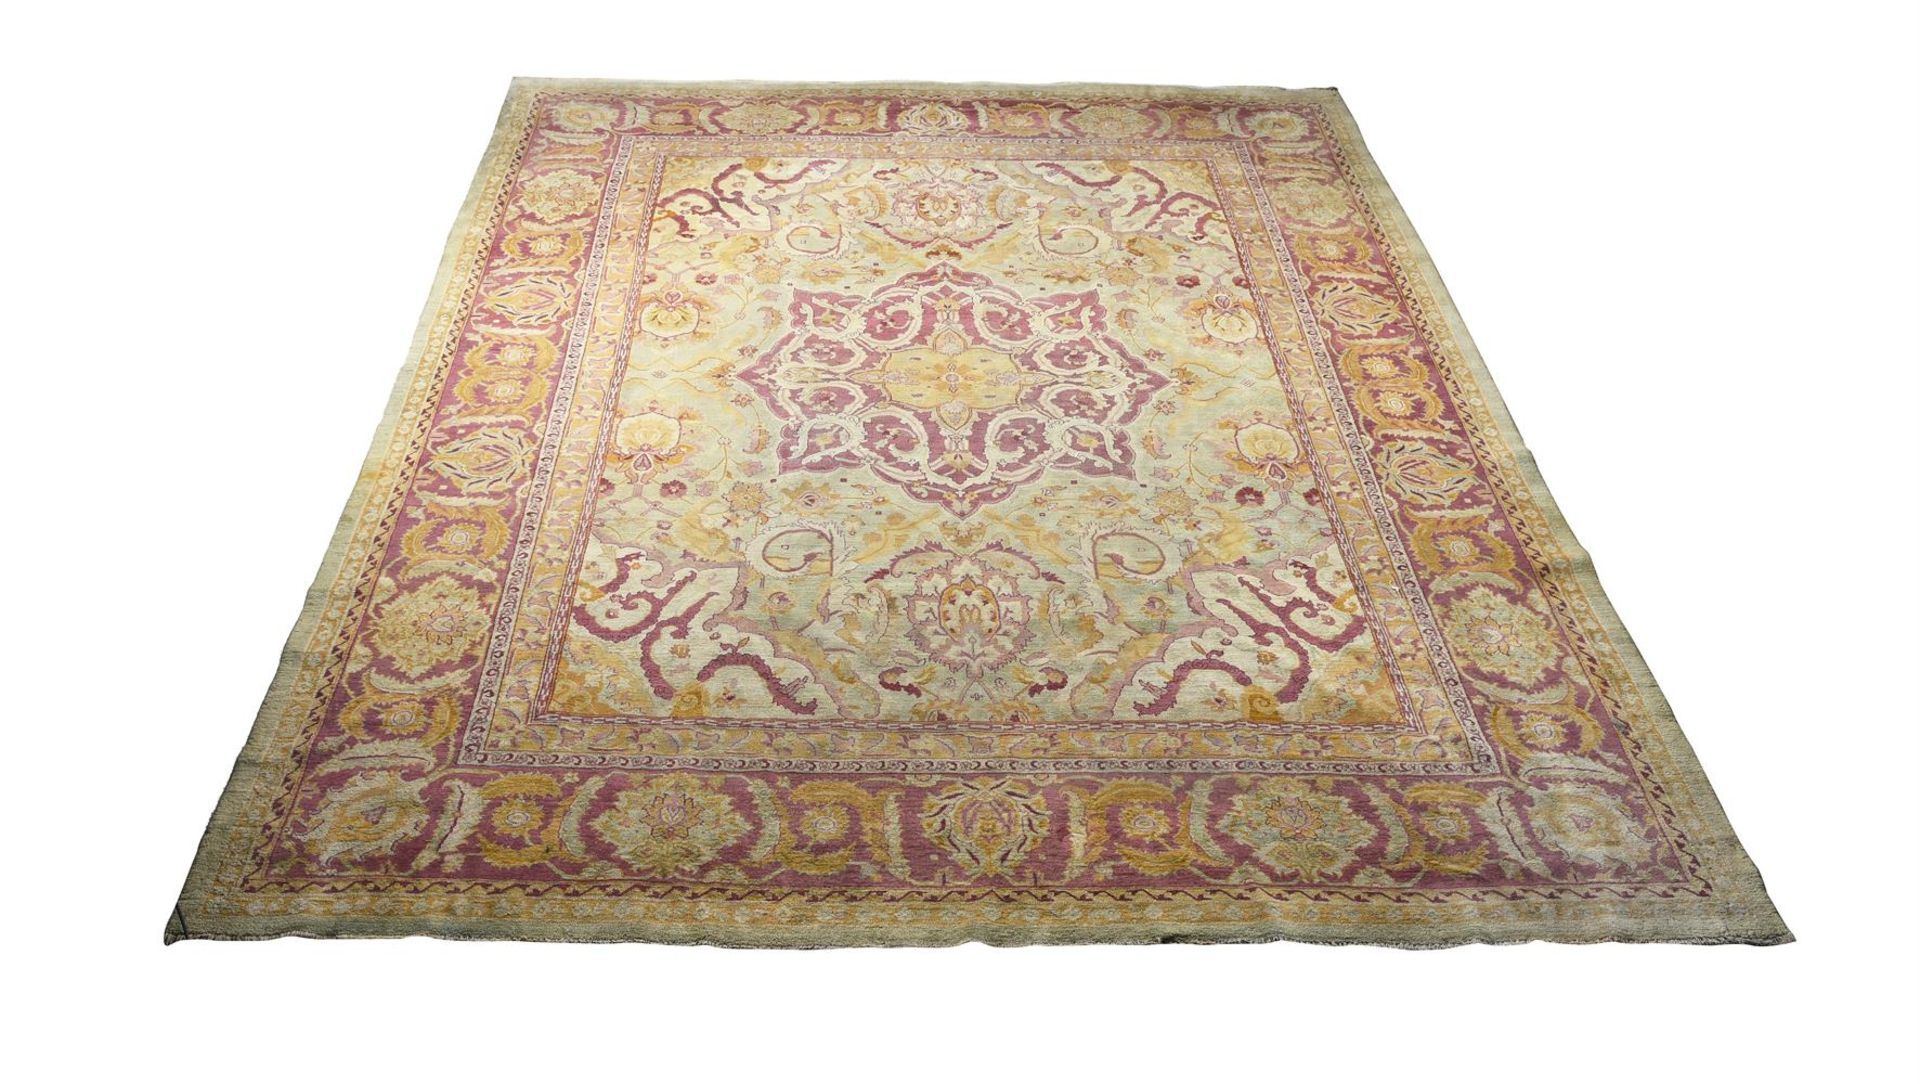 A LARGE AMRITSAR CARPET, LATE 19TH CENTURY, approximately 478 x 395cm